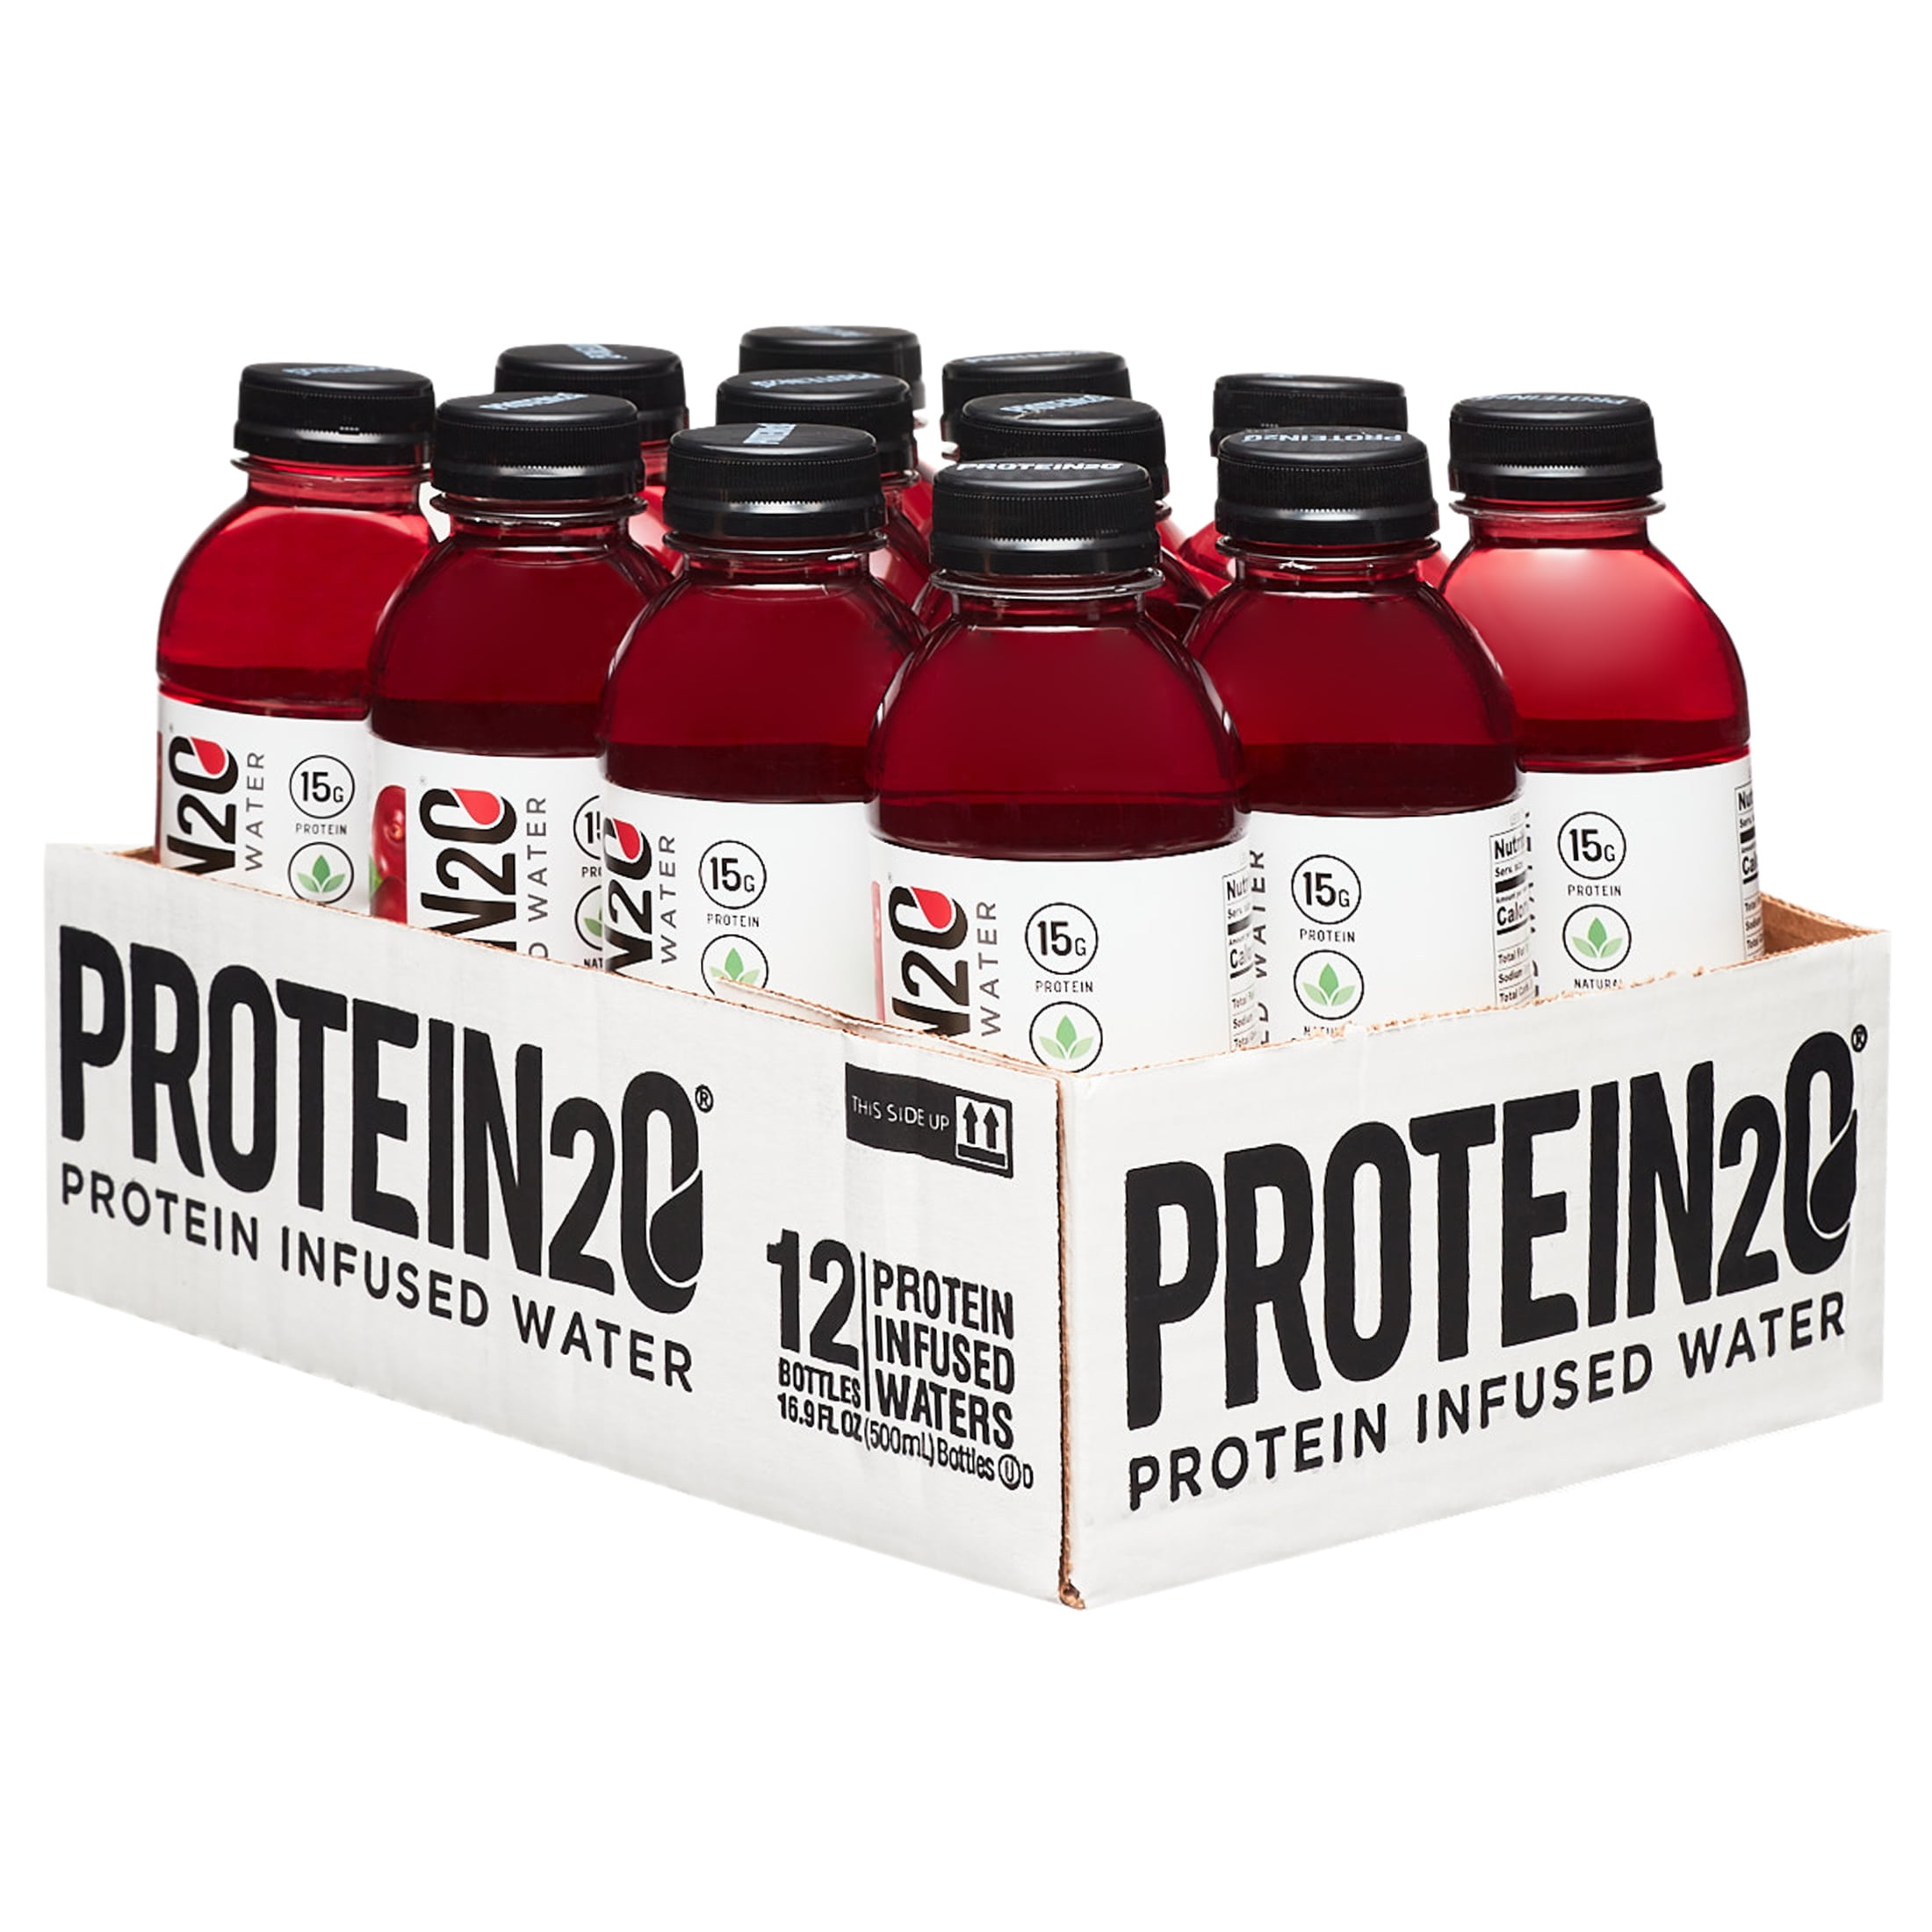 Shop - 20g Variety Pack - Protein2o